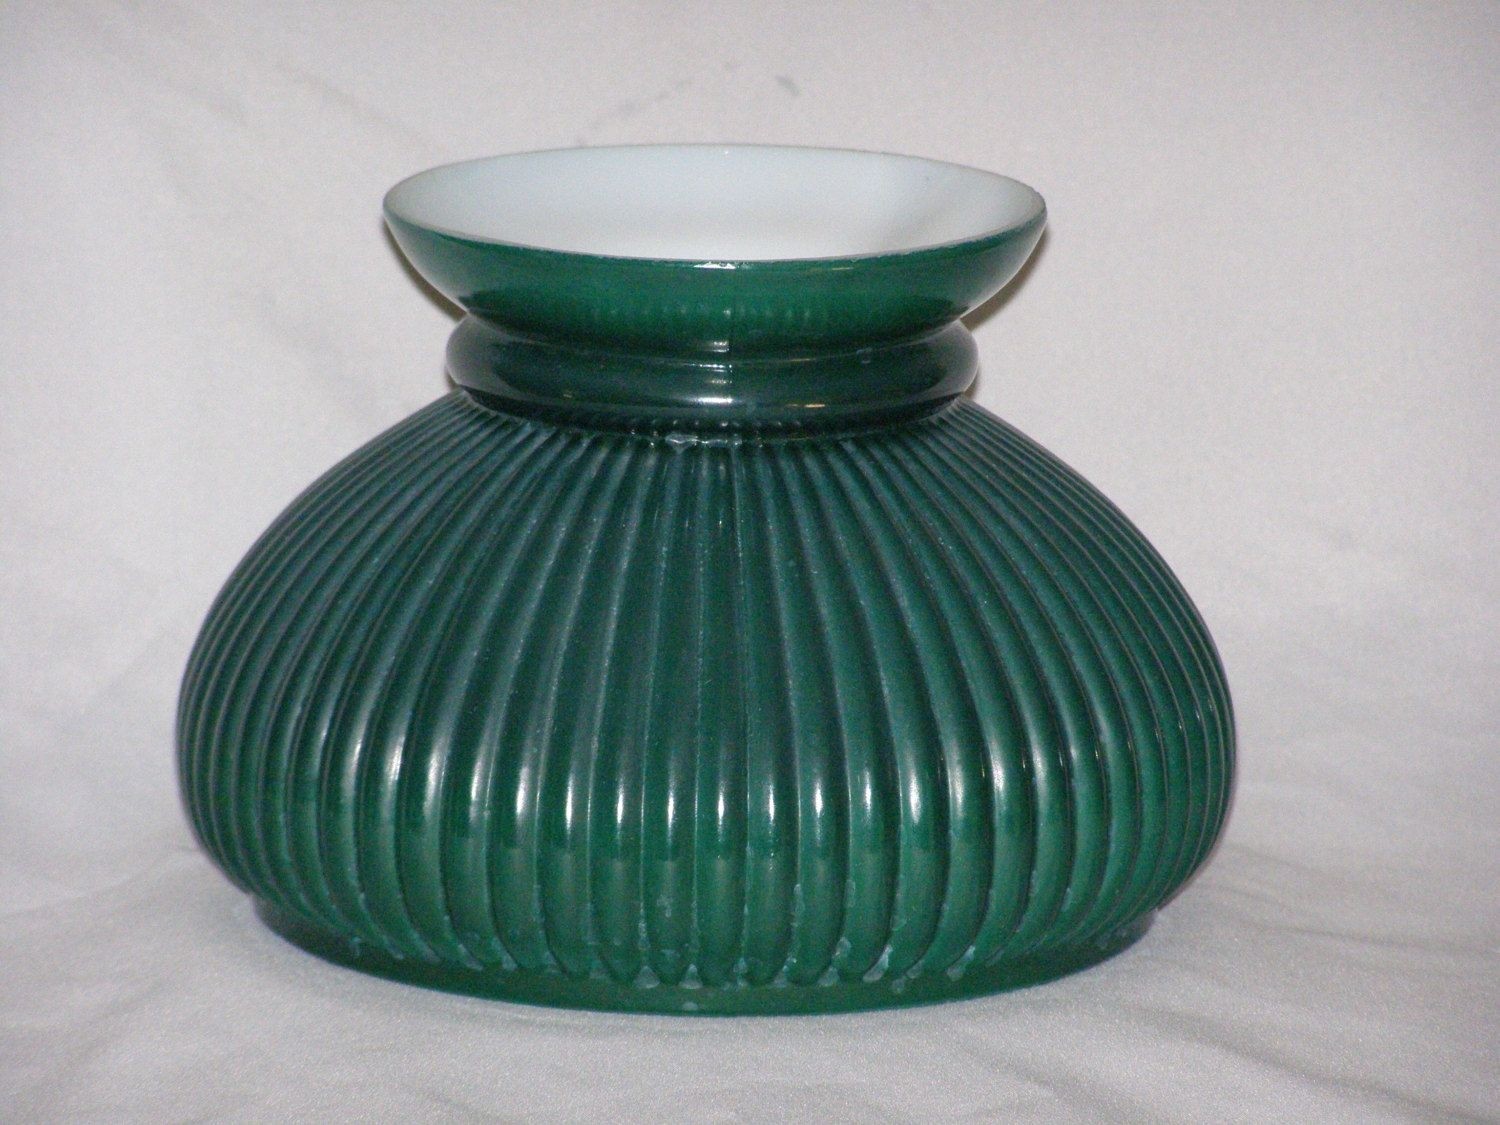 Vintage glass lamp shade green in color